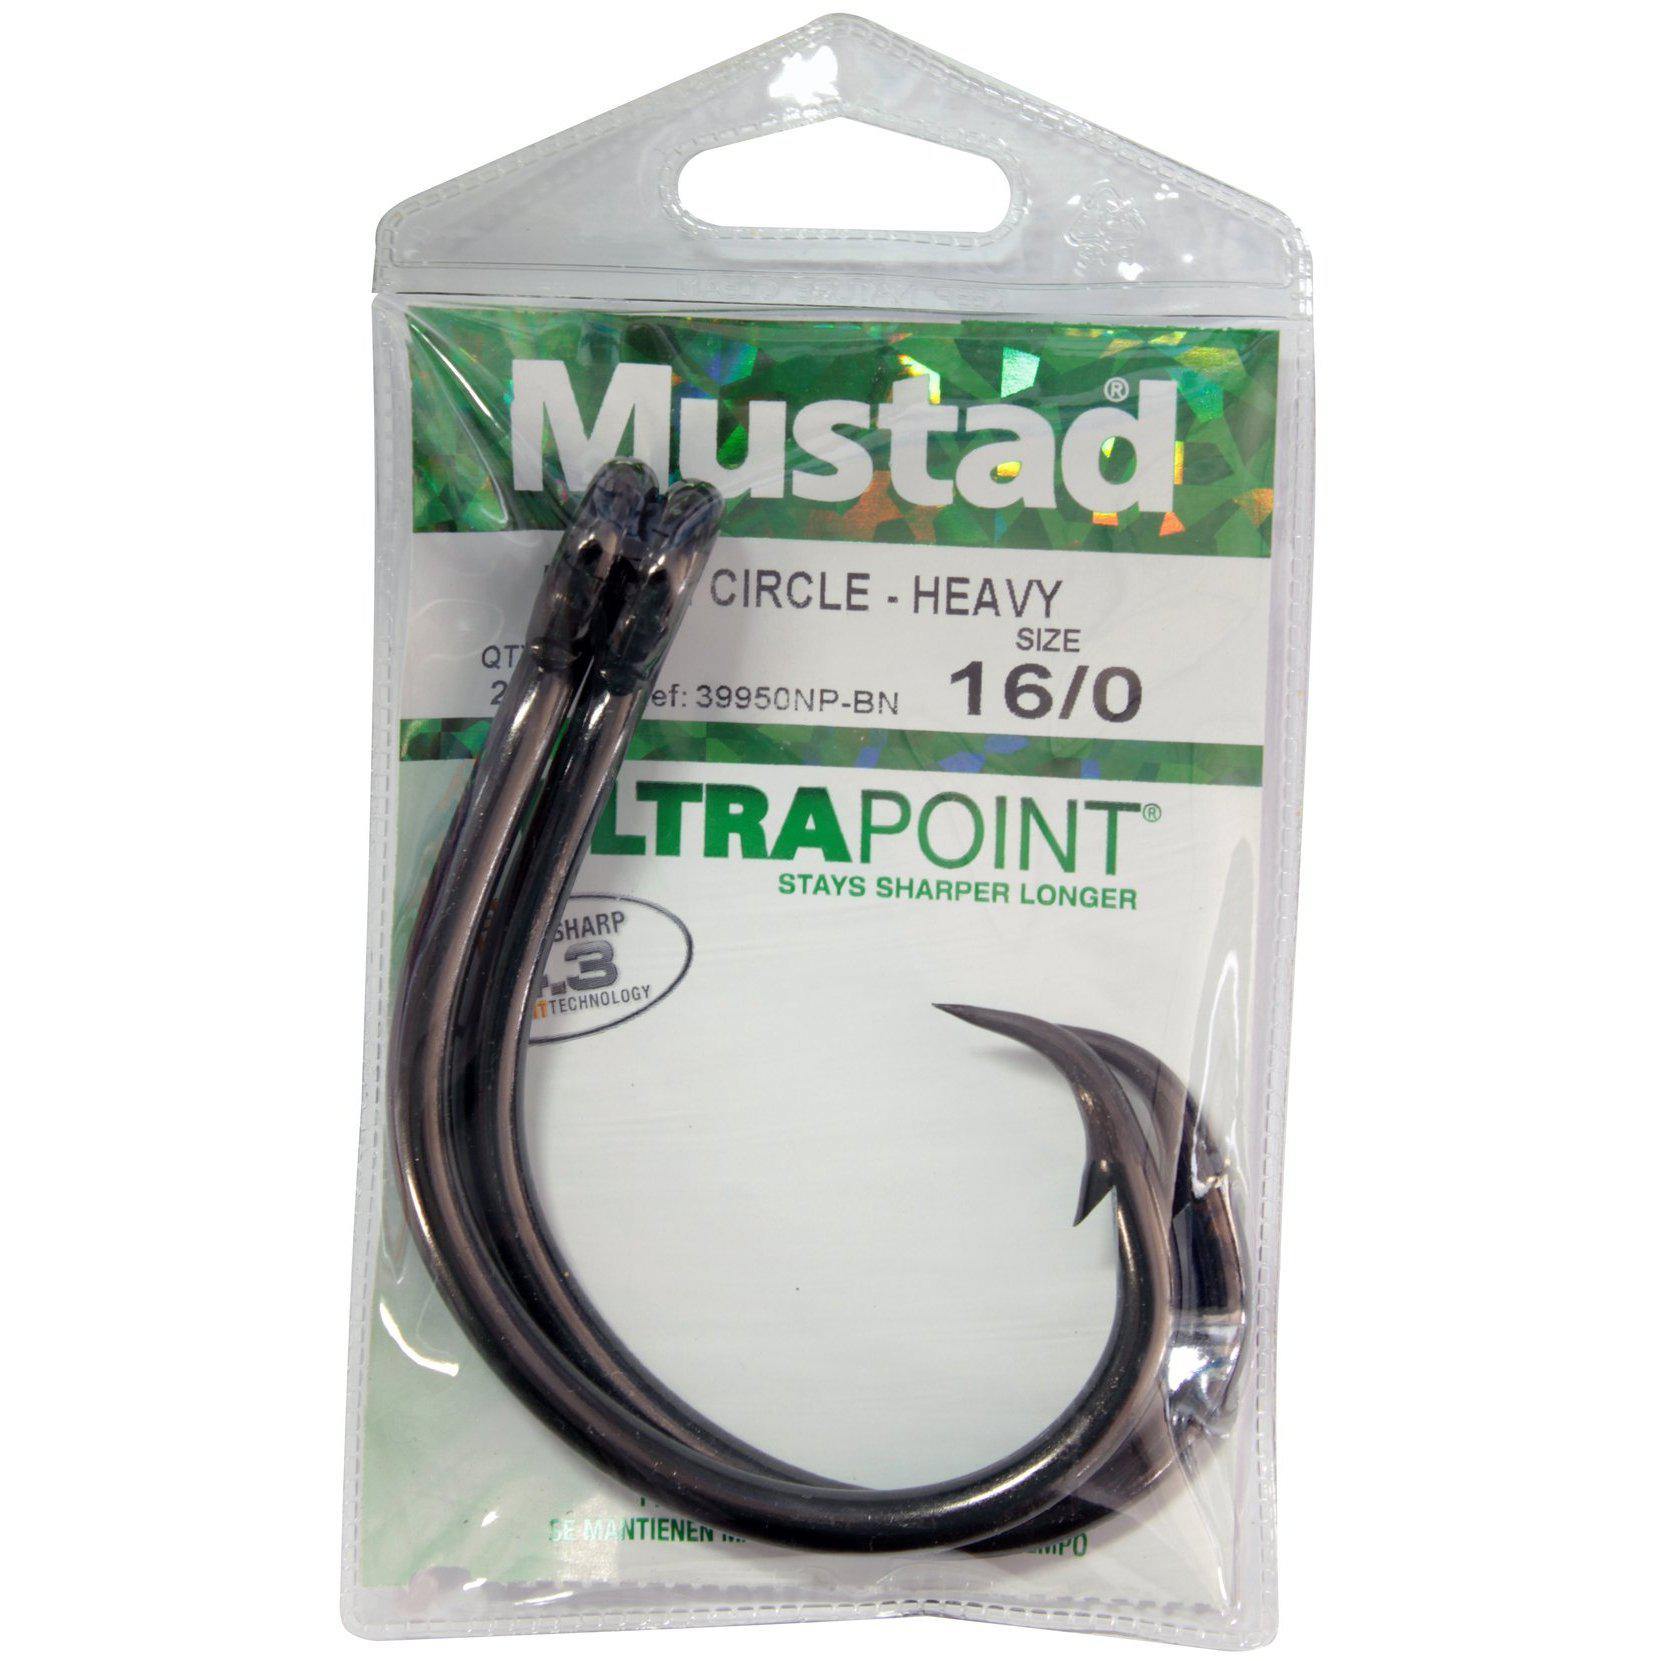 2 Pack Mustad 39943BLN-120 Ultra Point Size 12/0 4X Strong Demon Circle Hook